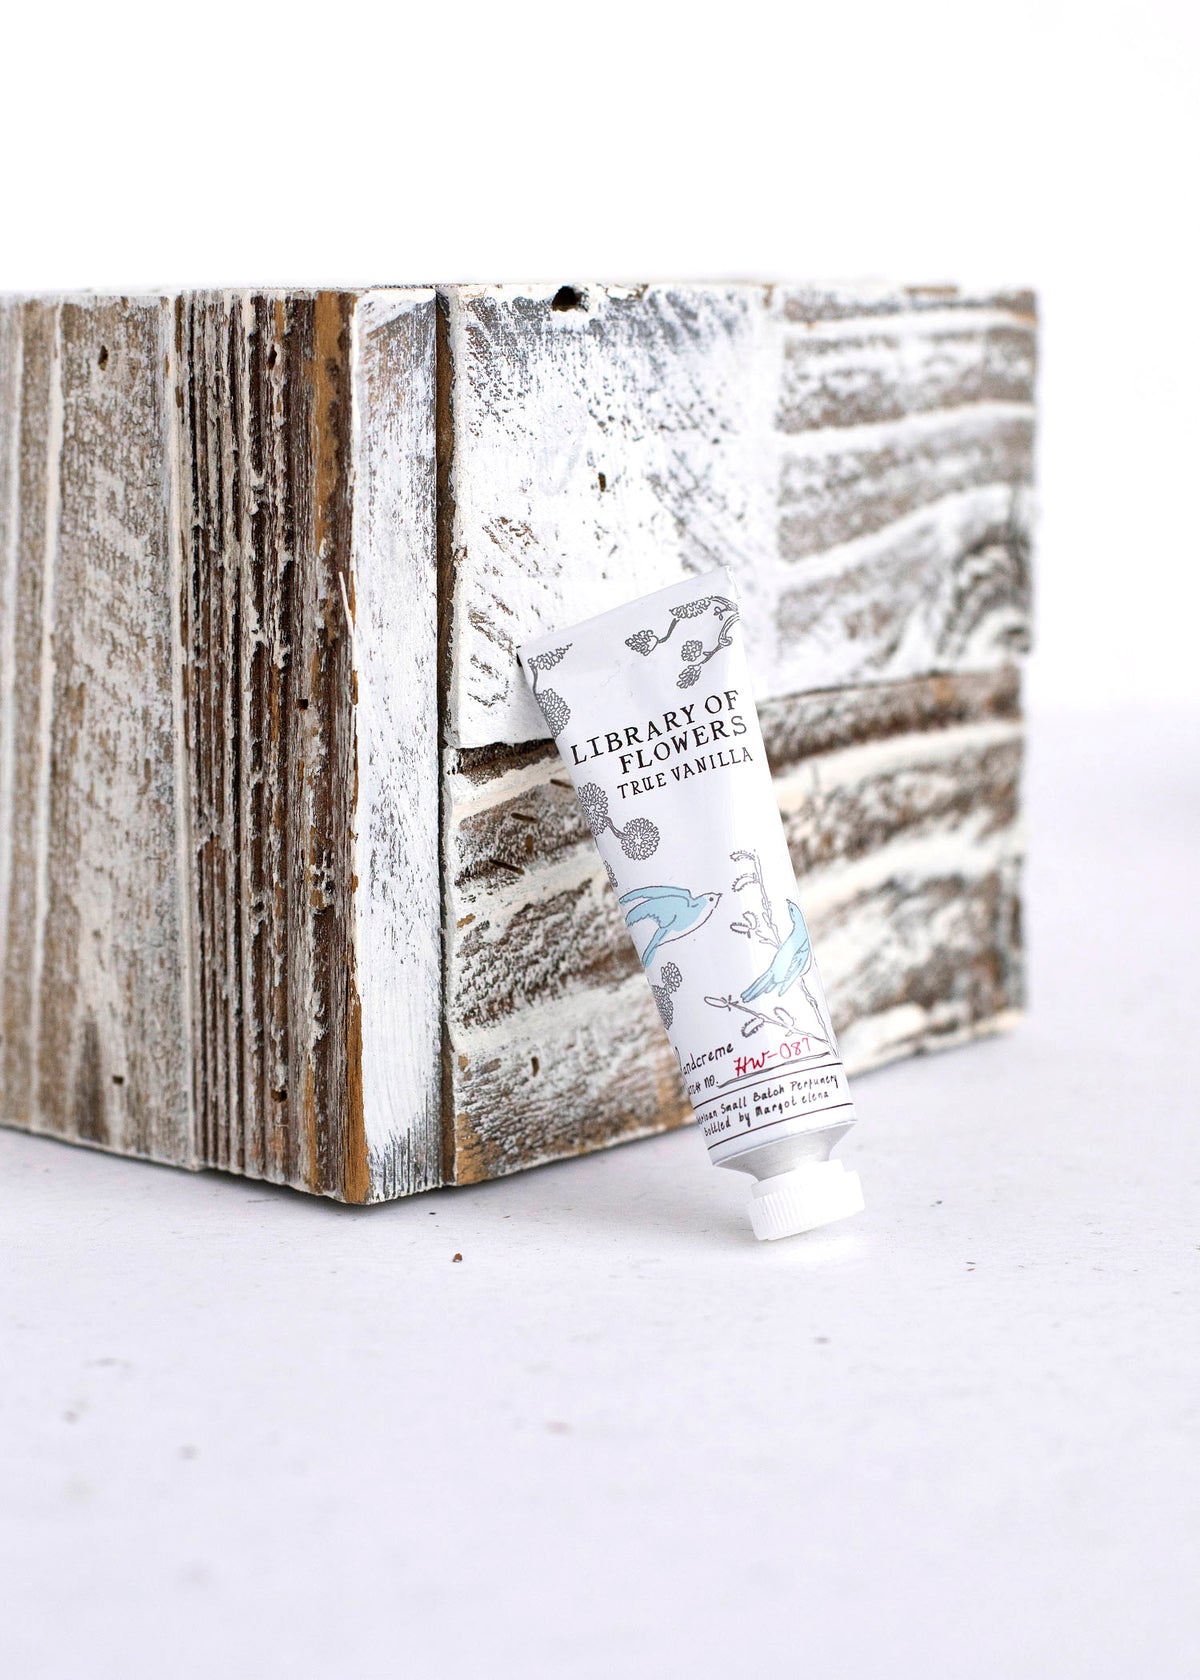 A Library of Flowers True Vanilla Petite Treat Handcreme hand cream tube by Margot Elena with deep hydration leans against a rustic wooden block with a distressed white paint finish, against a light background.